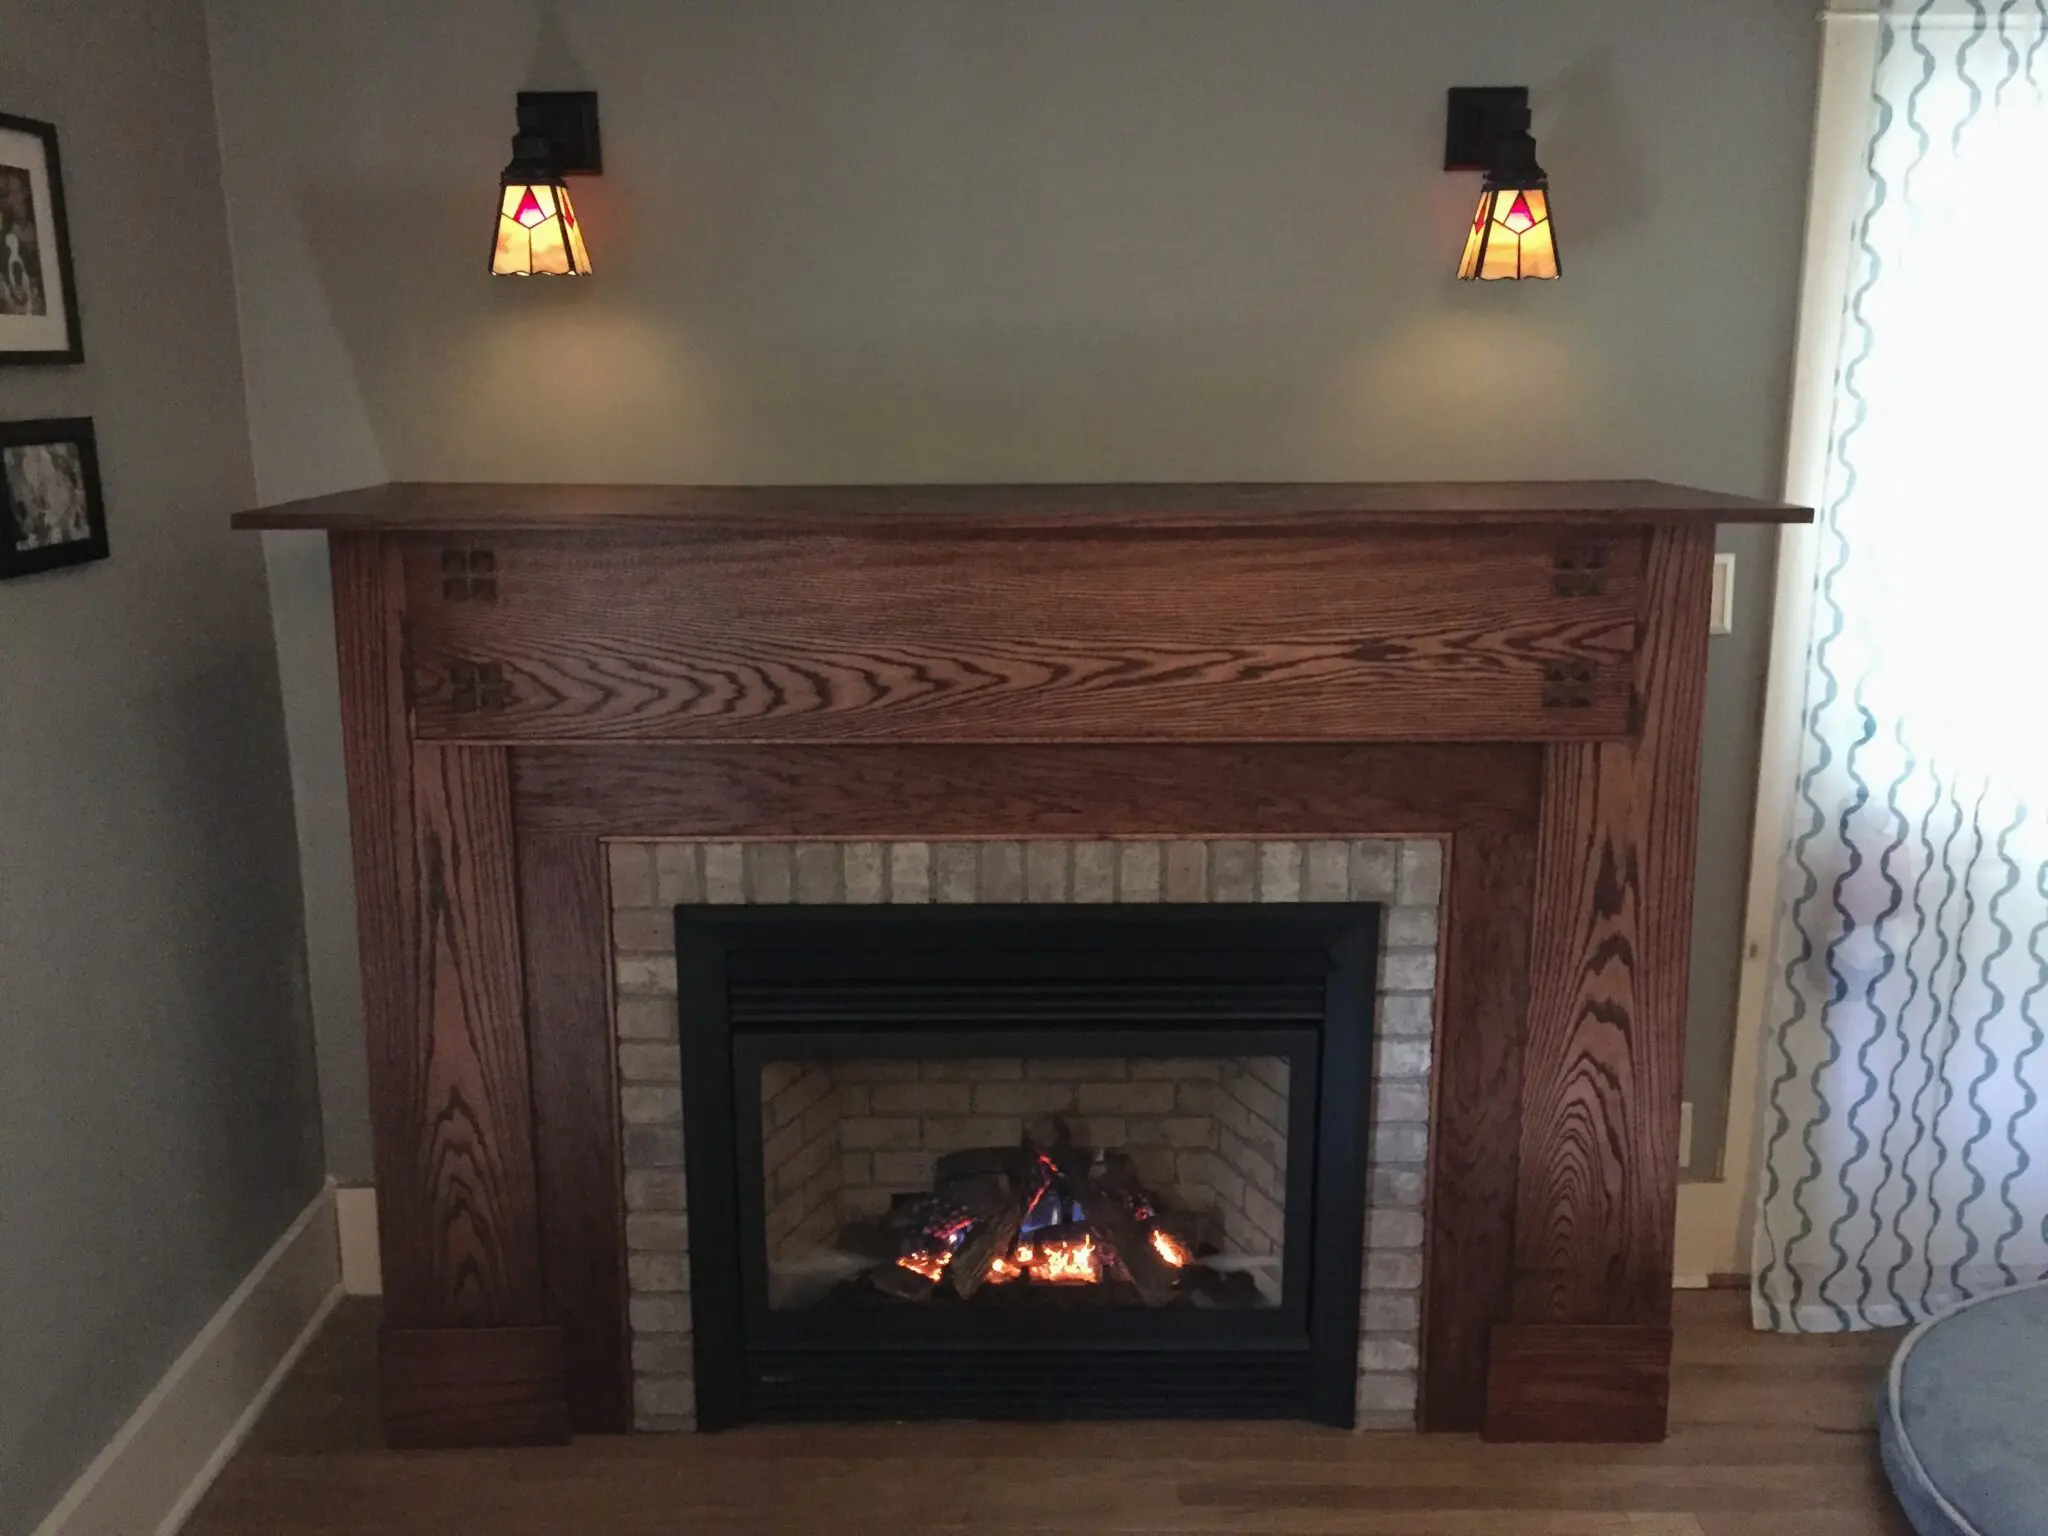 Craftsman style mantel and bookcase in the picture